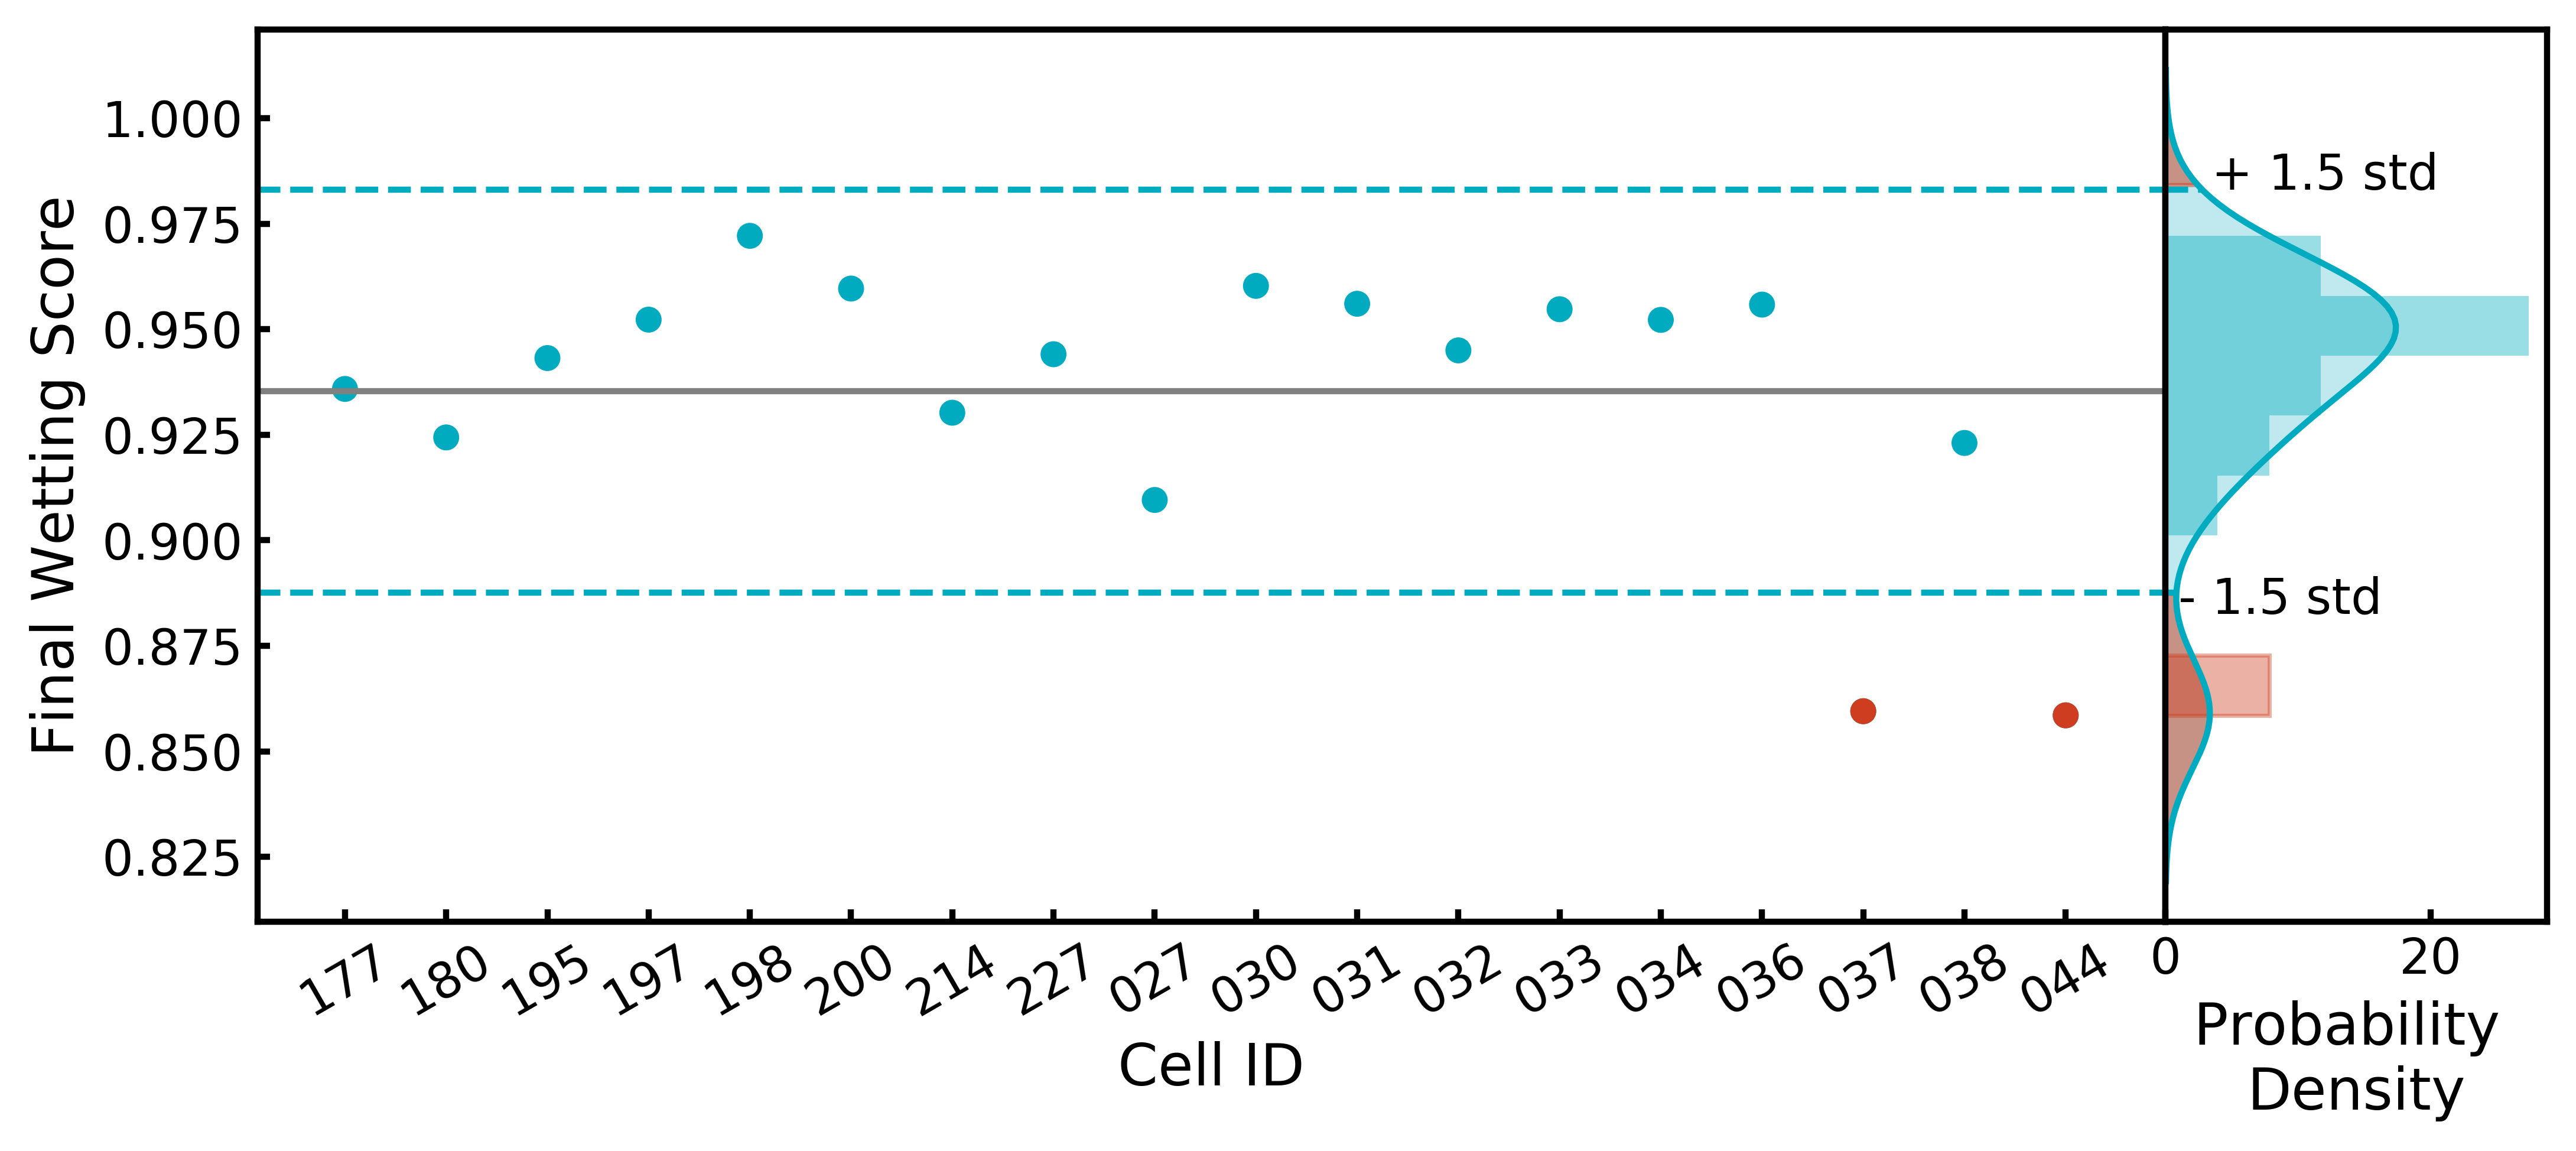 FInal wetting score values highlighting outlier cells that failed a quality check.